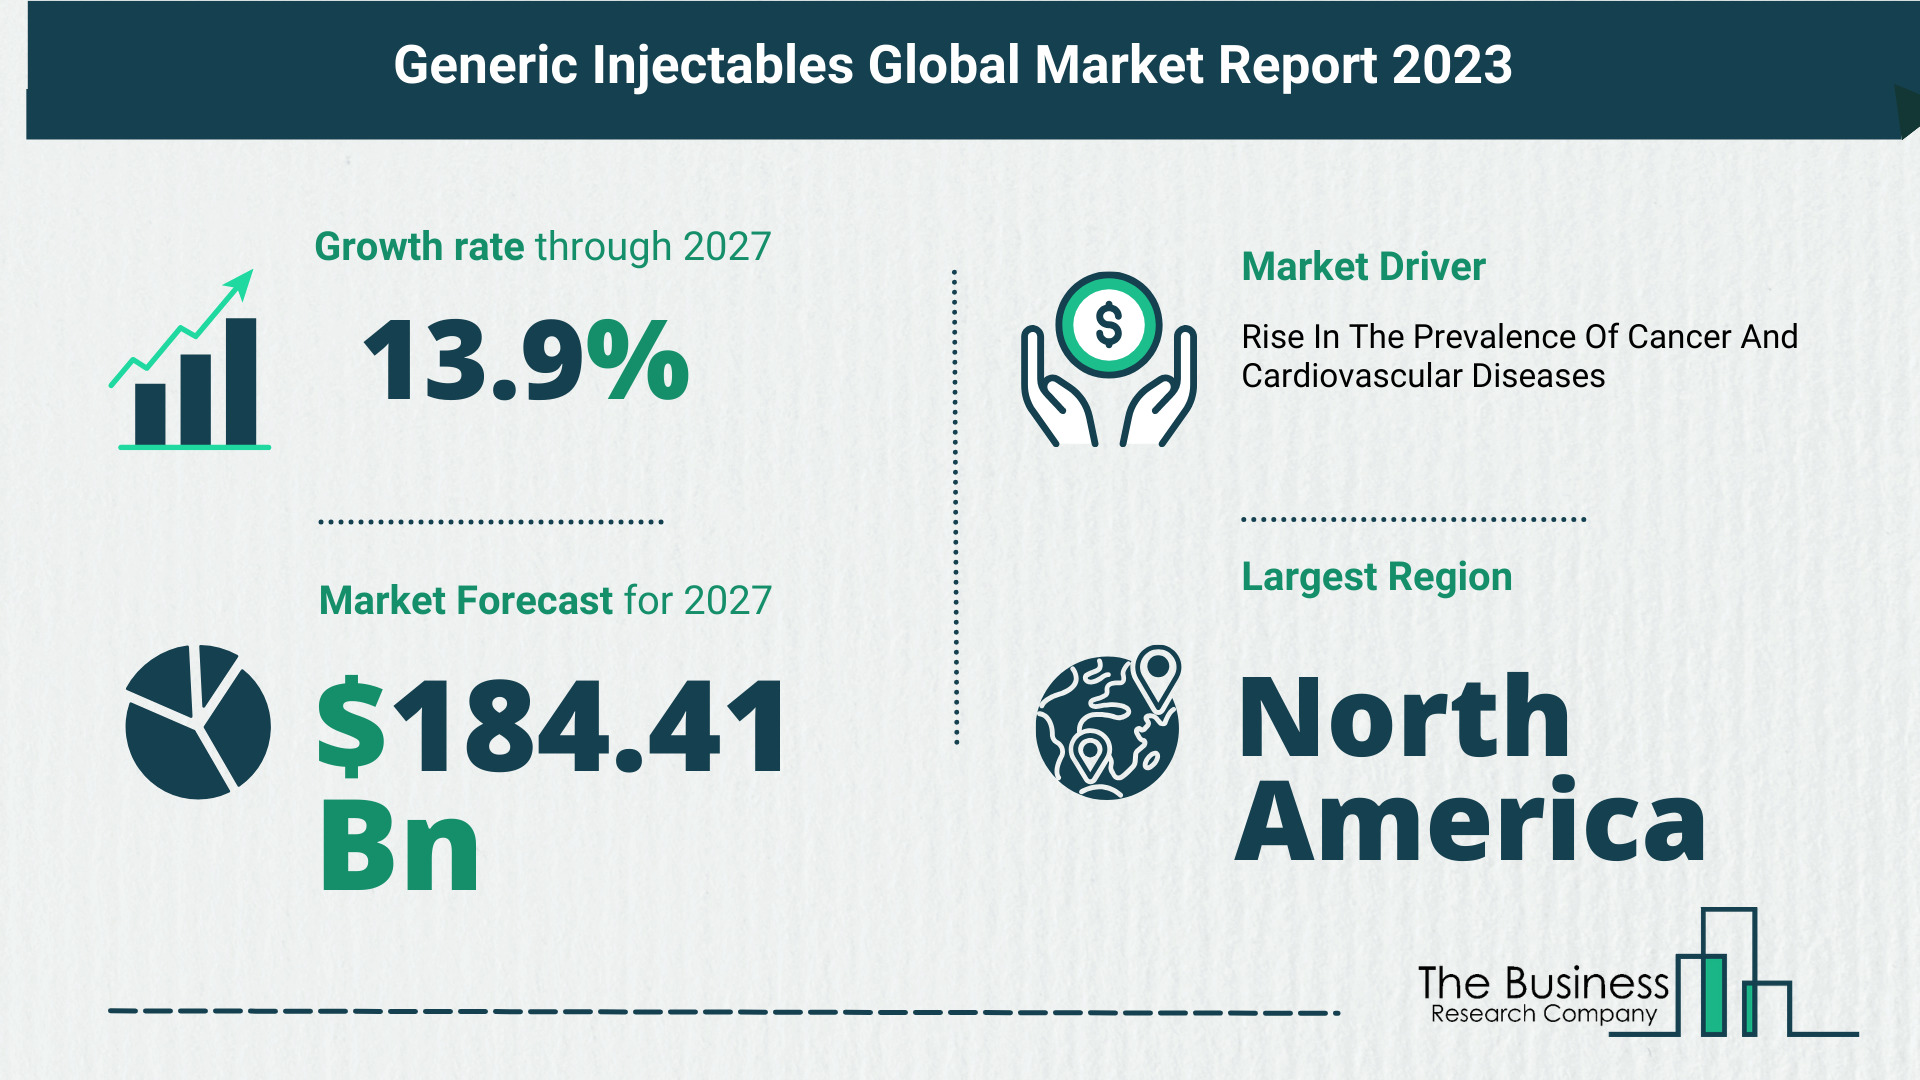 Global Generic Injectables Market